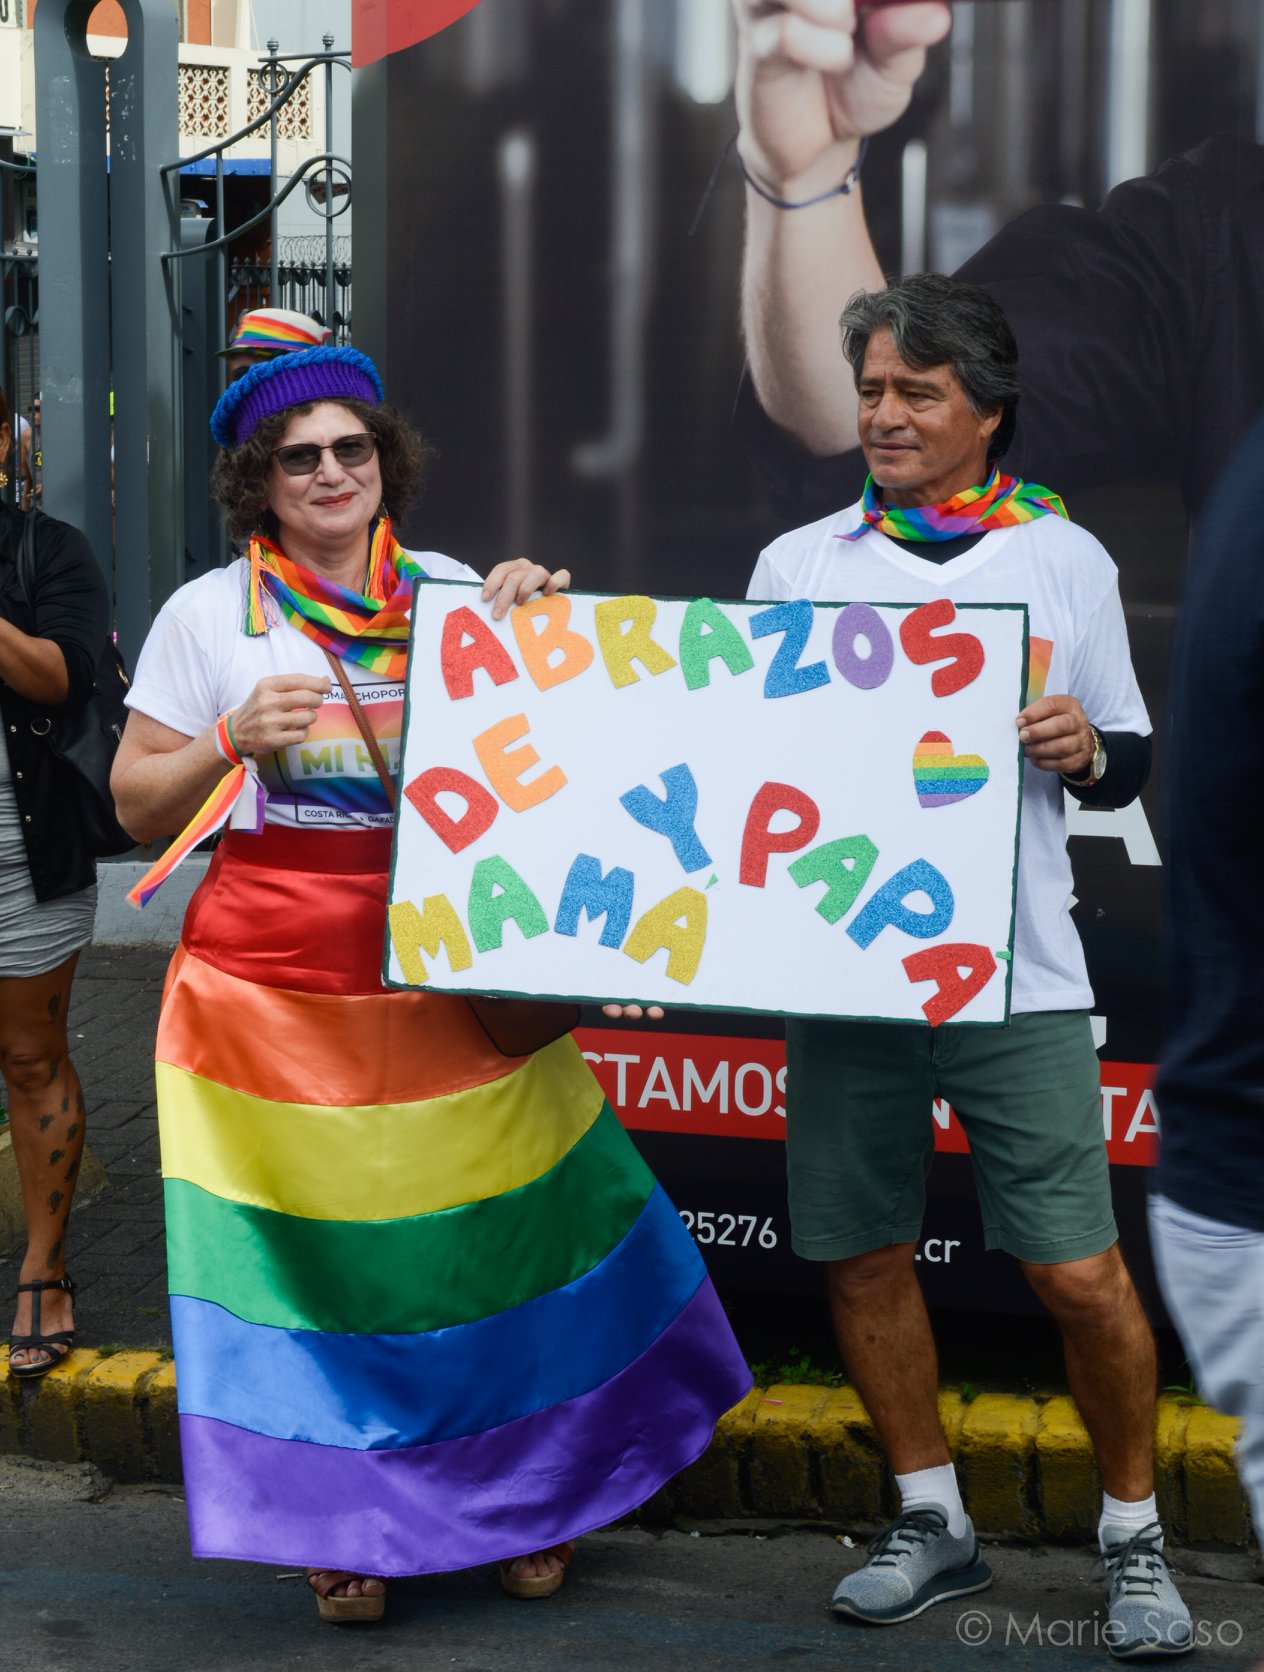 Image shows two people wrapped in pride flags, holding a sign that reads 'Abrazos de y papa mama'